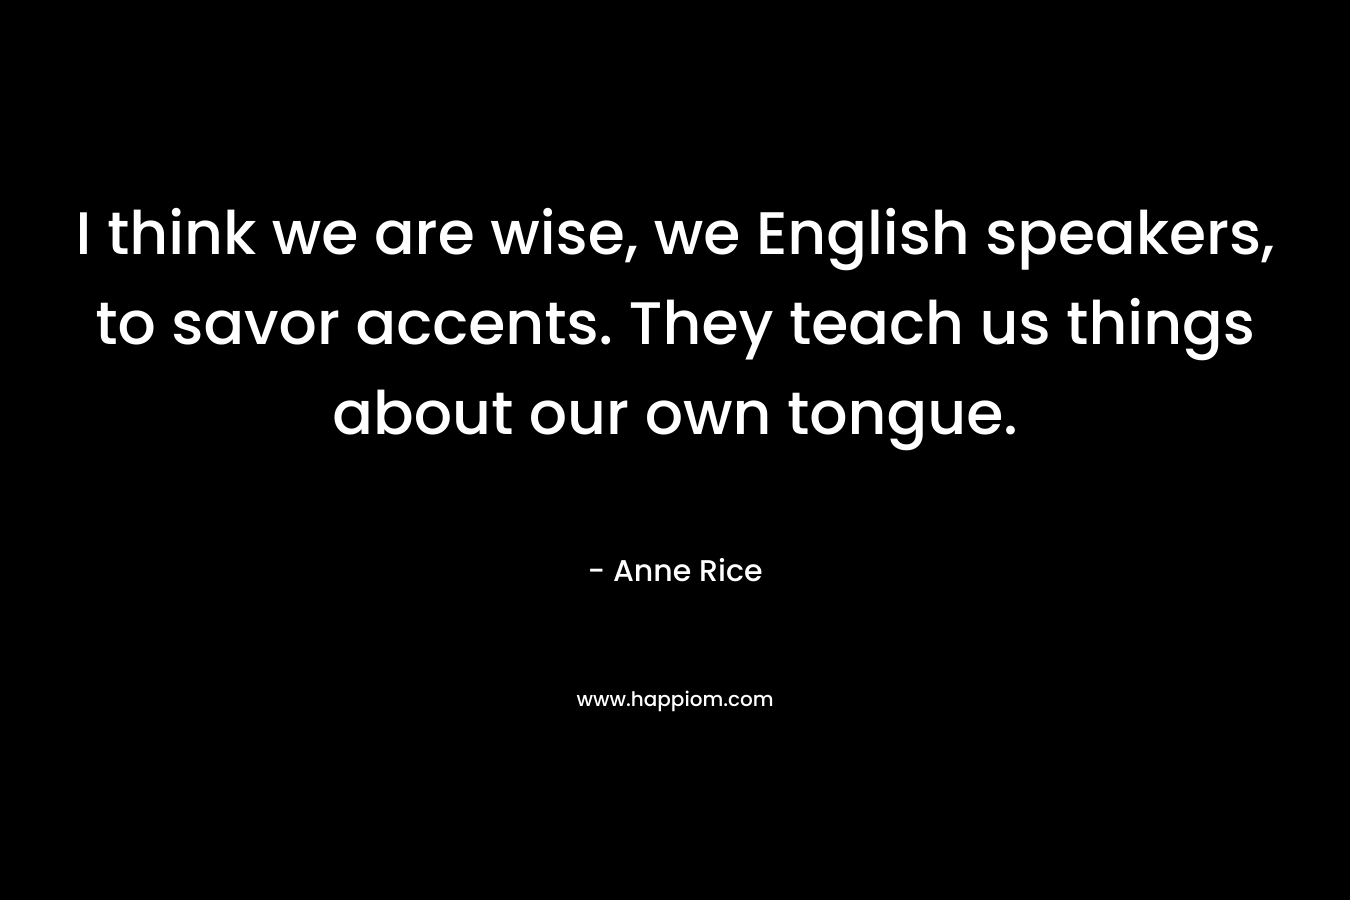 I think we are wise, we English speakers, to savor accents. They teach us things about our own tongue. – Anne Rice